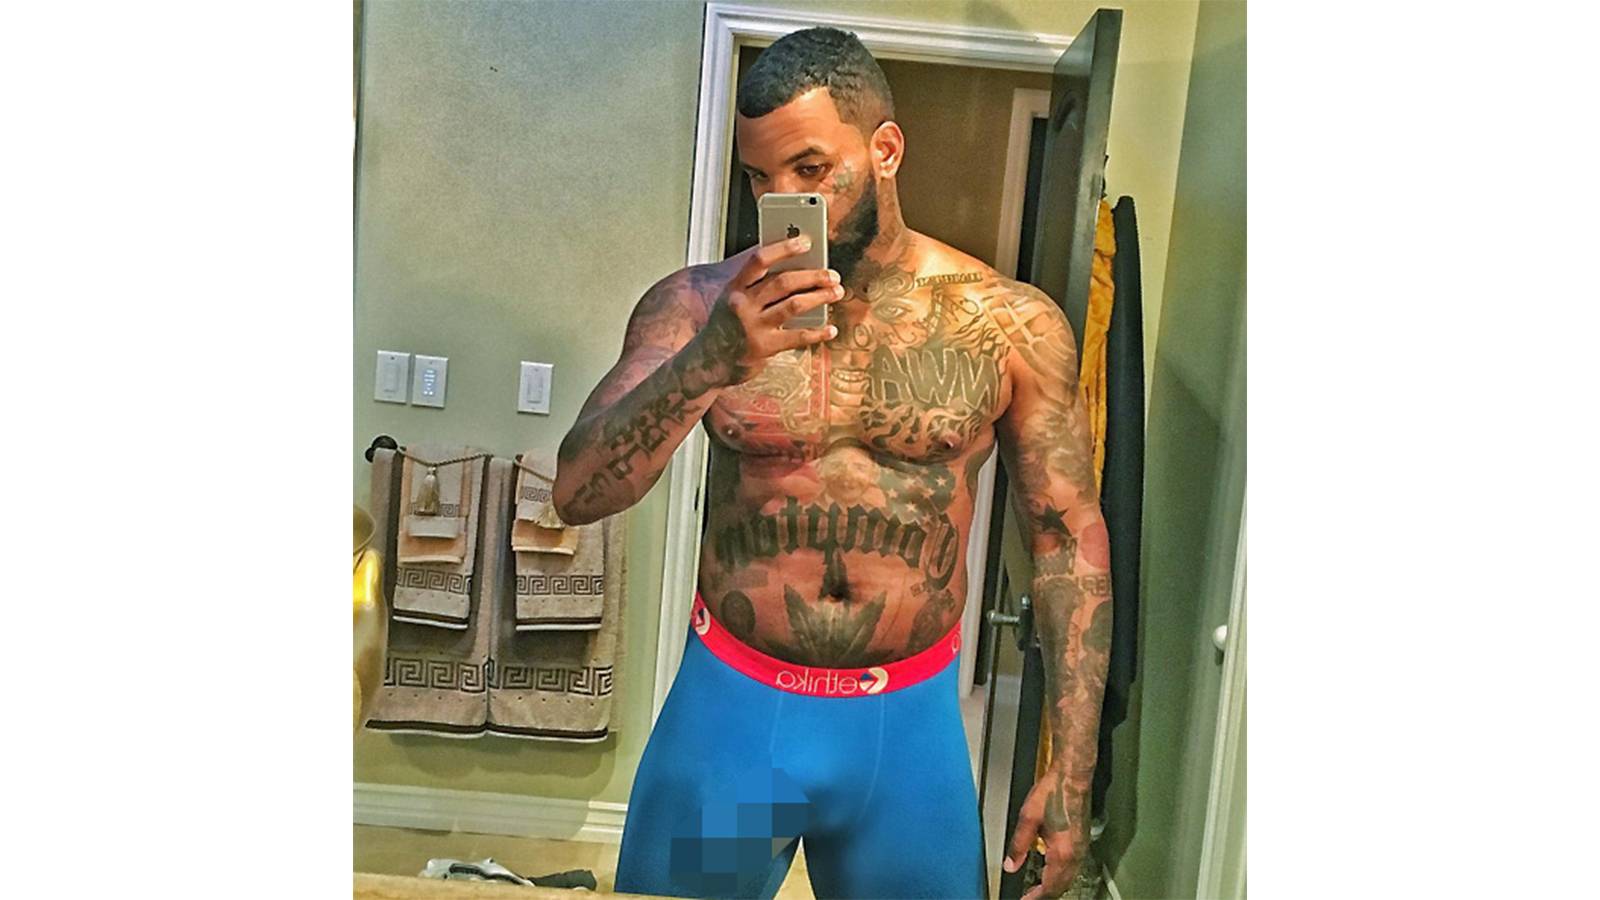 The Game S Penis Print Is An Early Christmas T For Underwear Sales